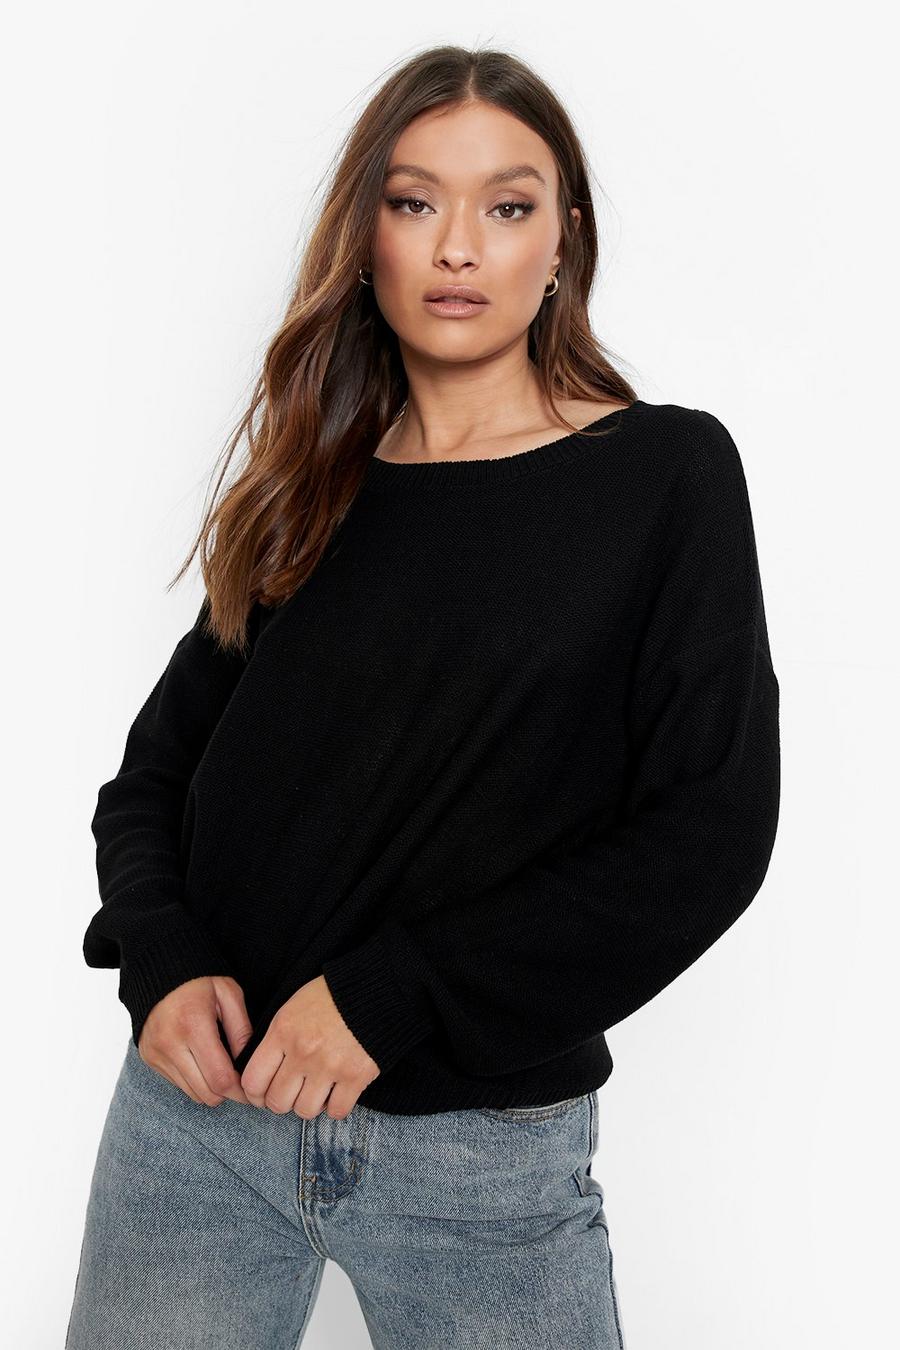 Black Crew Neck Knitted Sweater